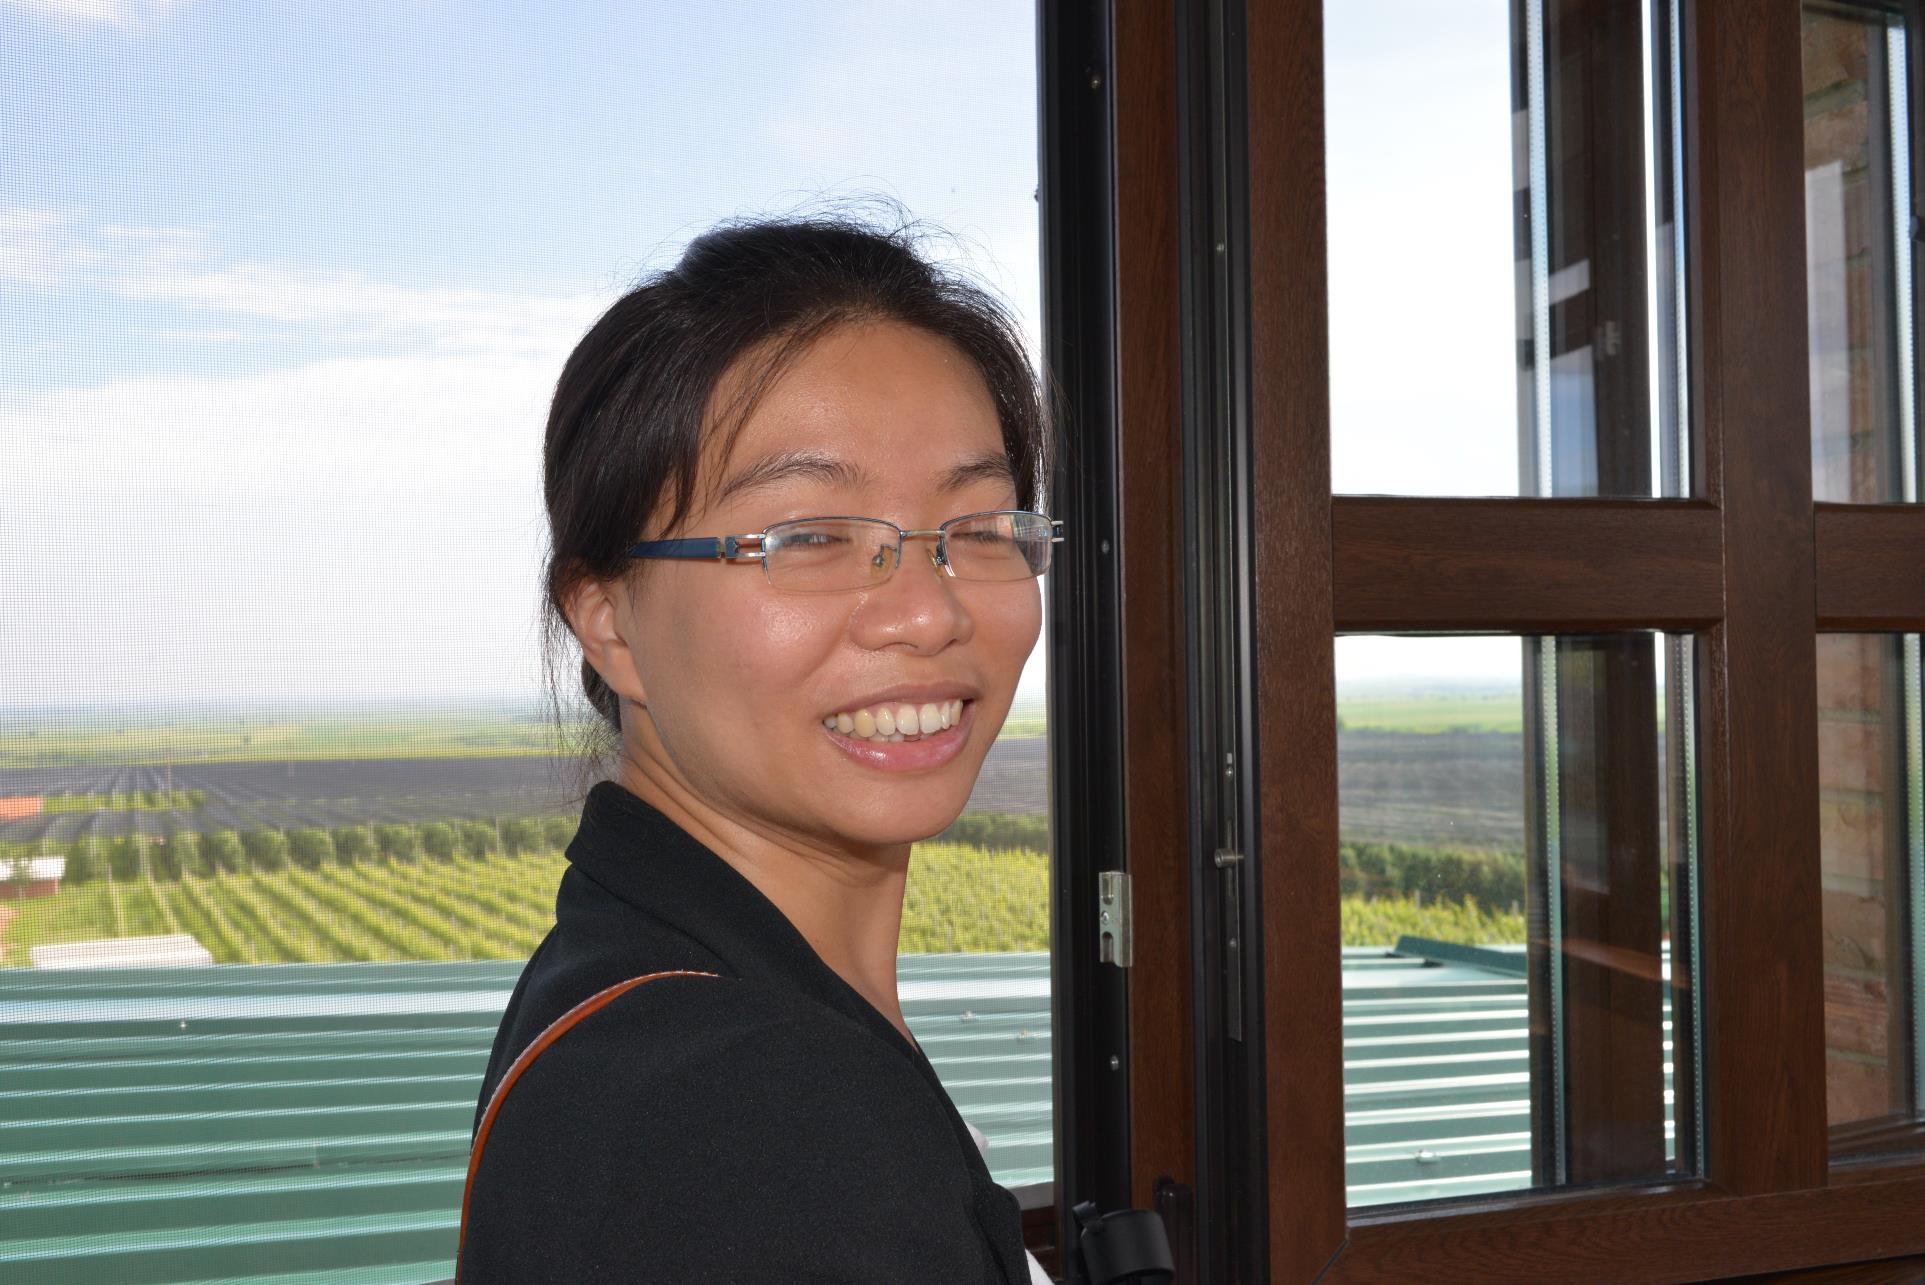 A person posing for the camera in front of a window

Description automatically generated